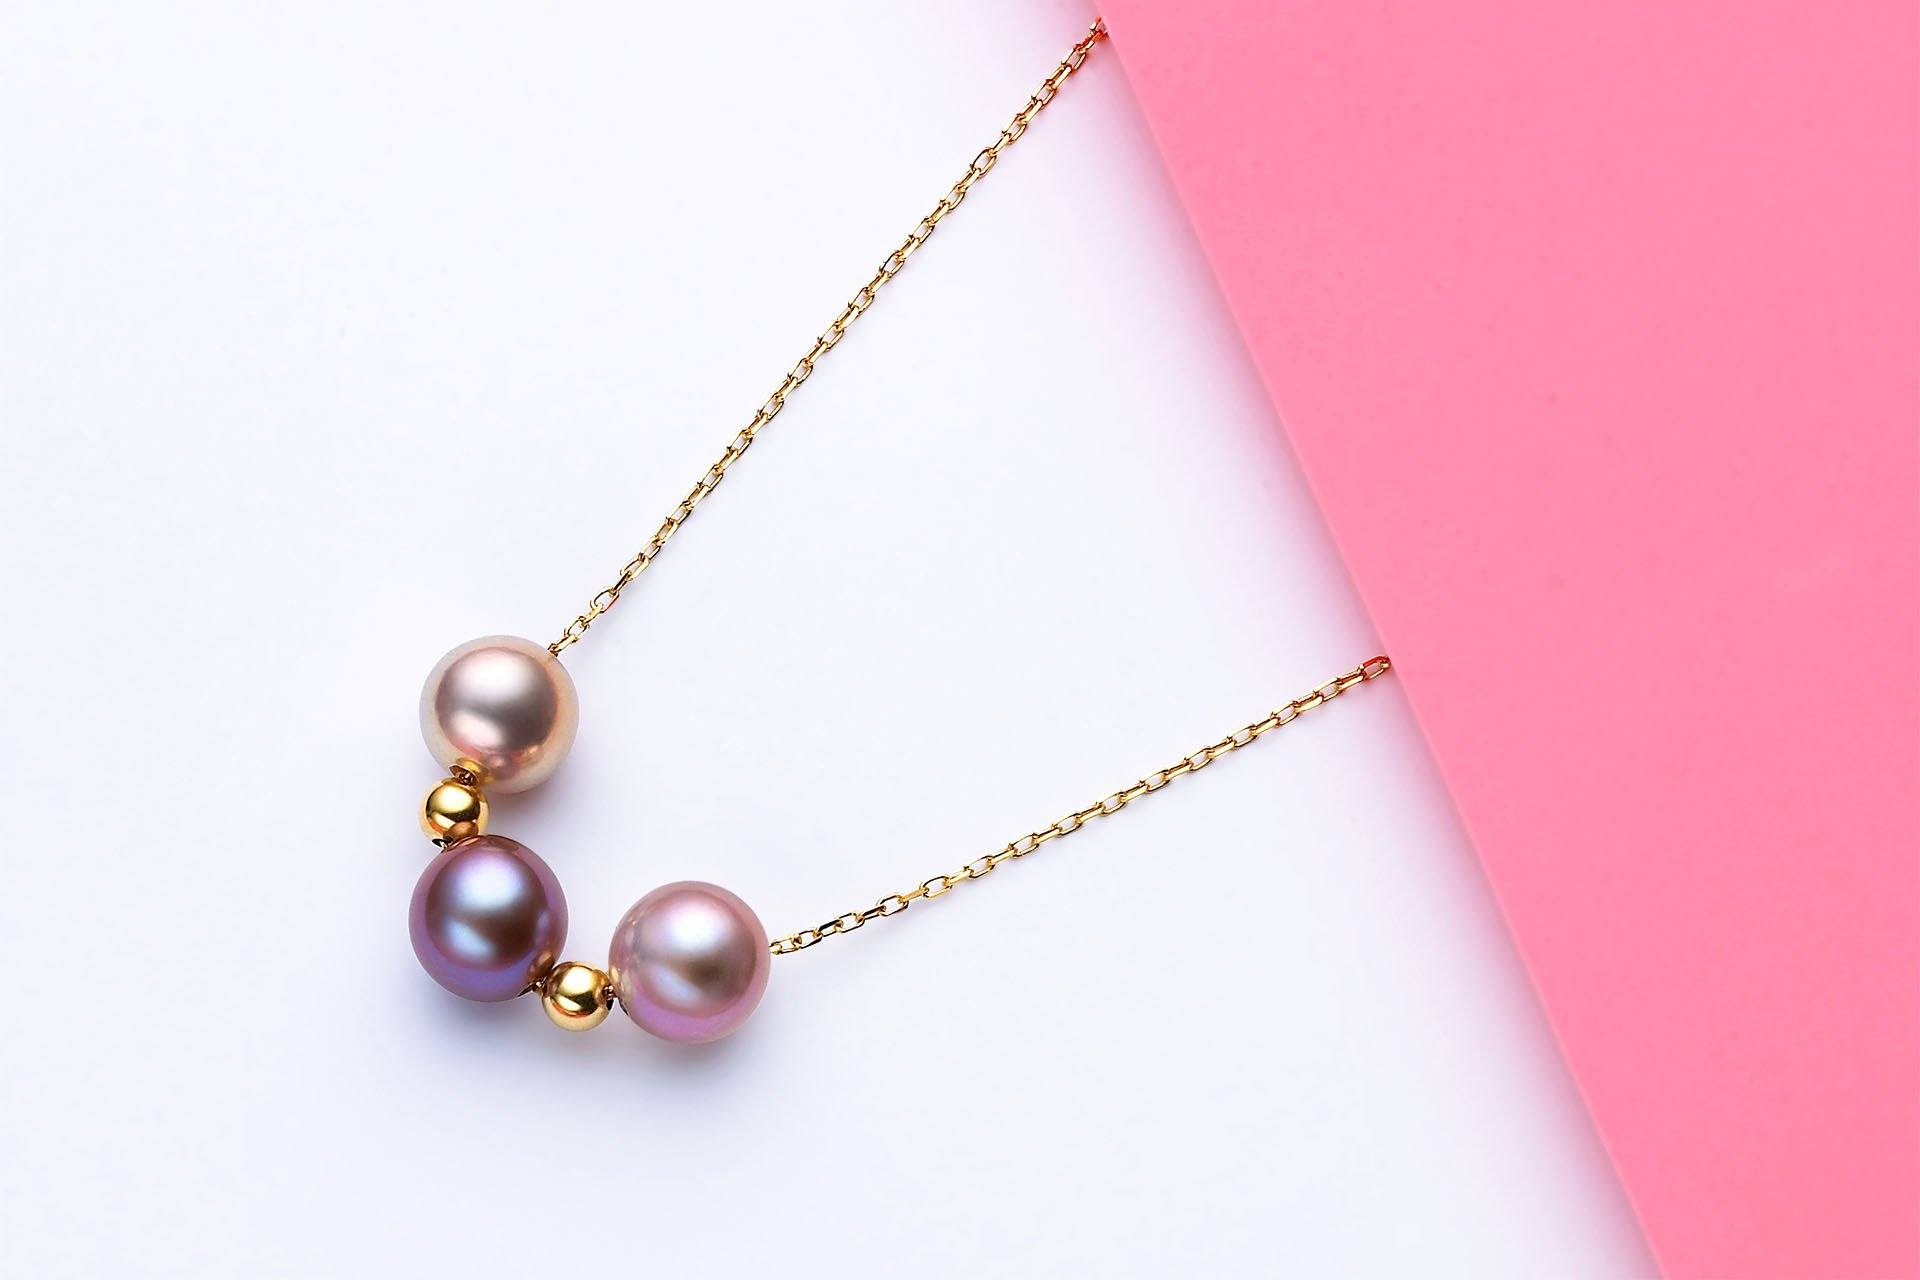 Rice Pearl Necklace | Real Pearl Necklace | Freshwater Pearl Choker Necklace  with Pendant – Huge Tomato